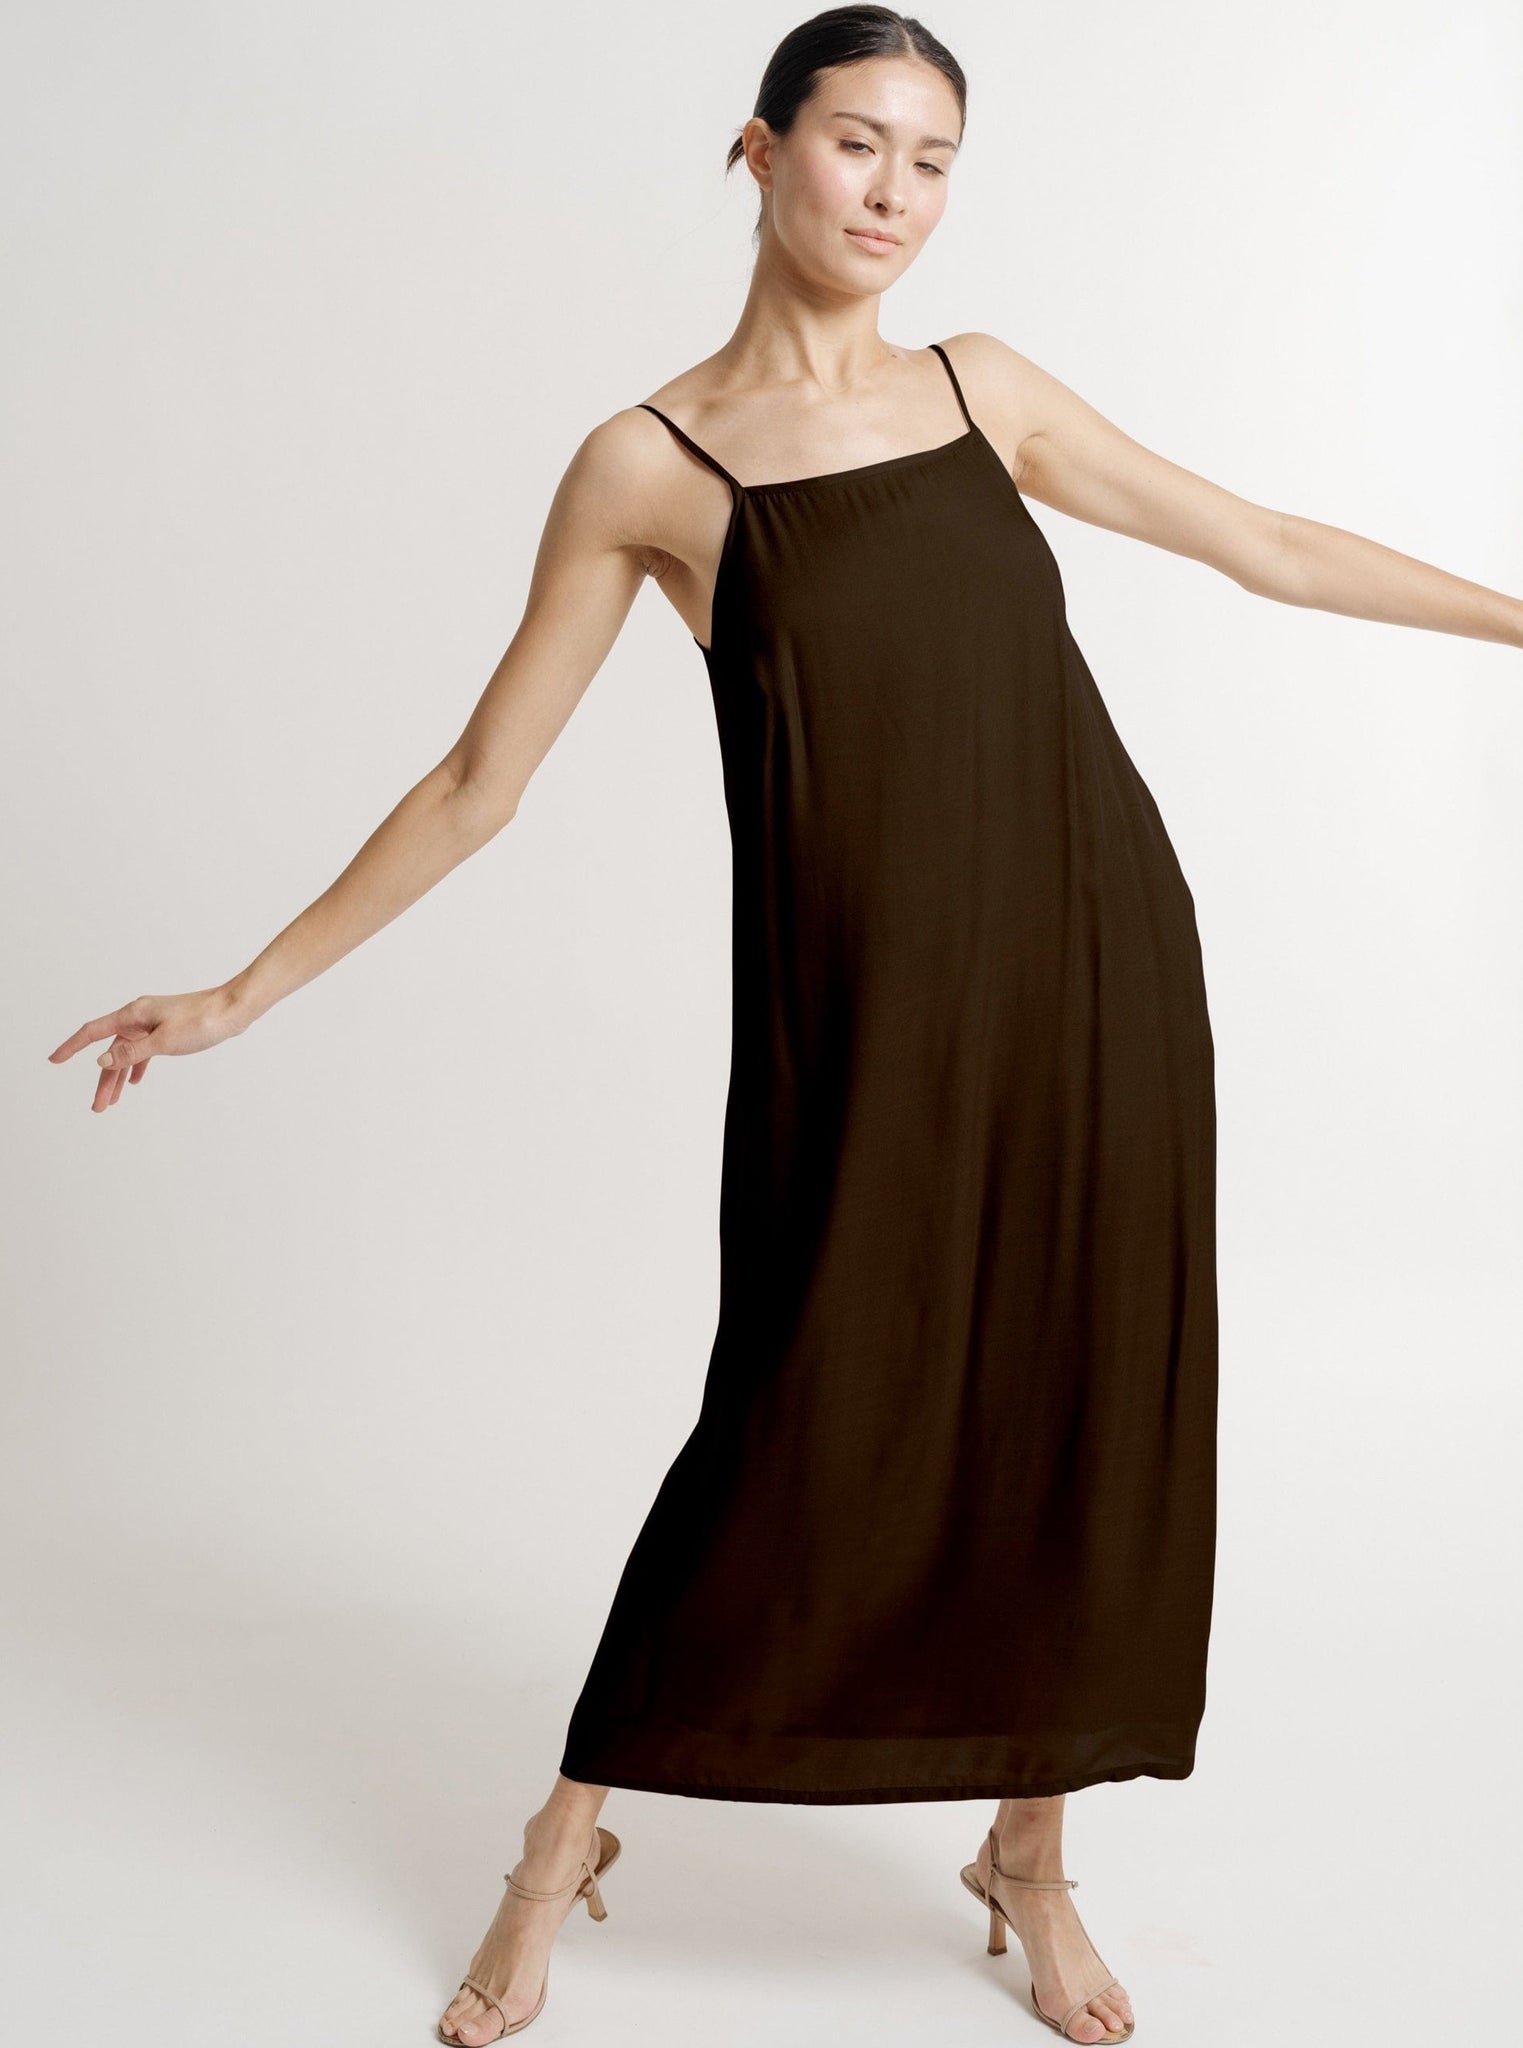 The sustainably made model is wearing a Kate Dress - Basalt Brown.